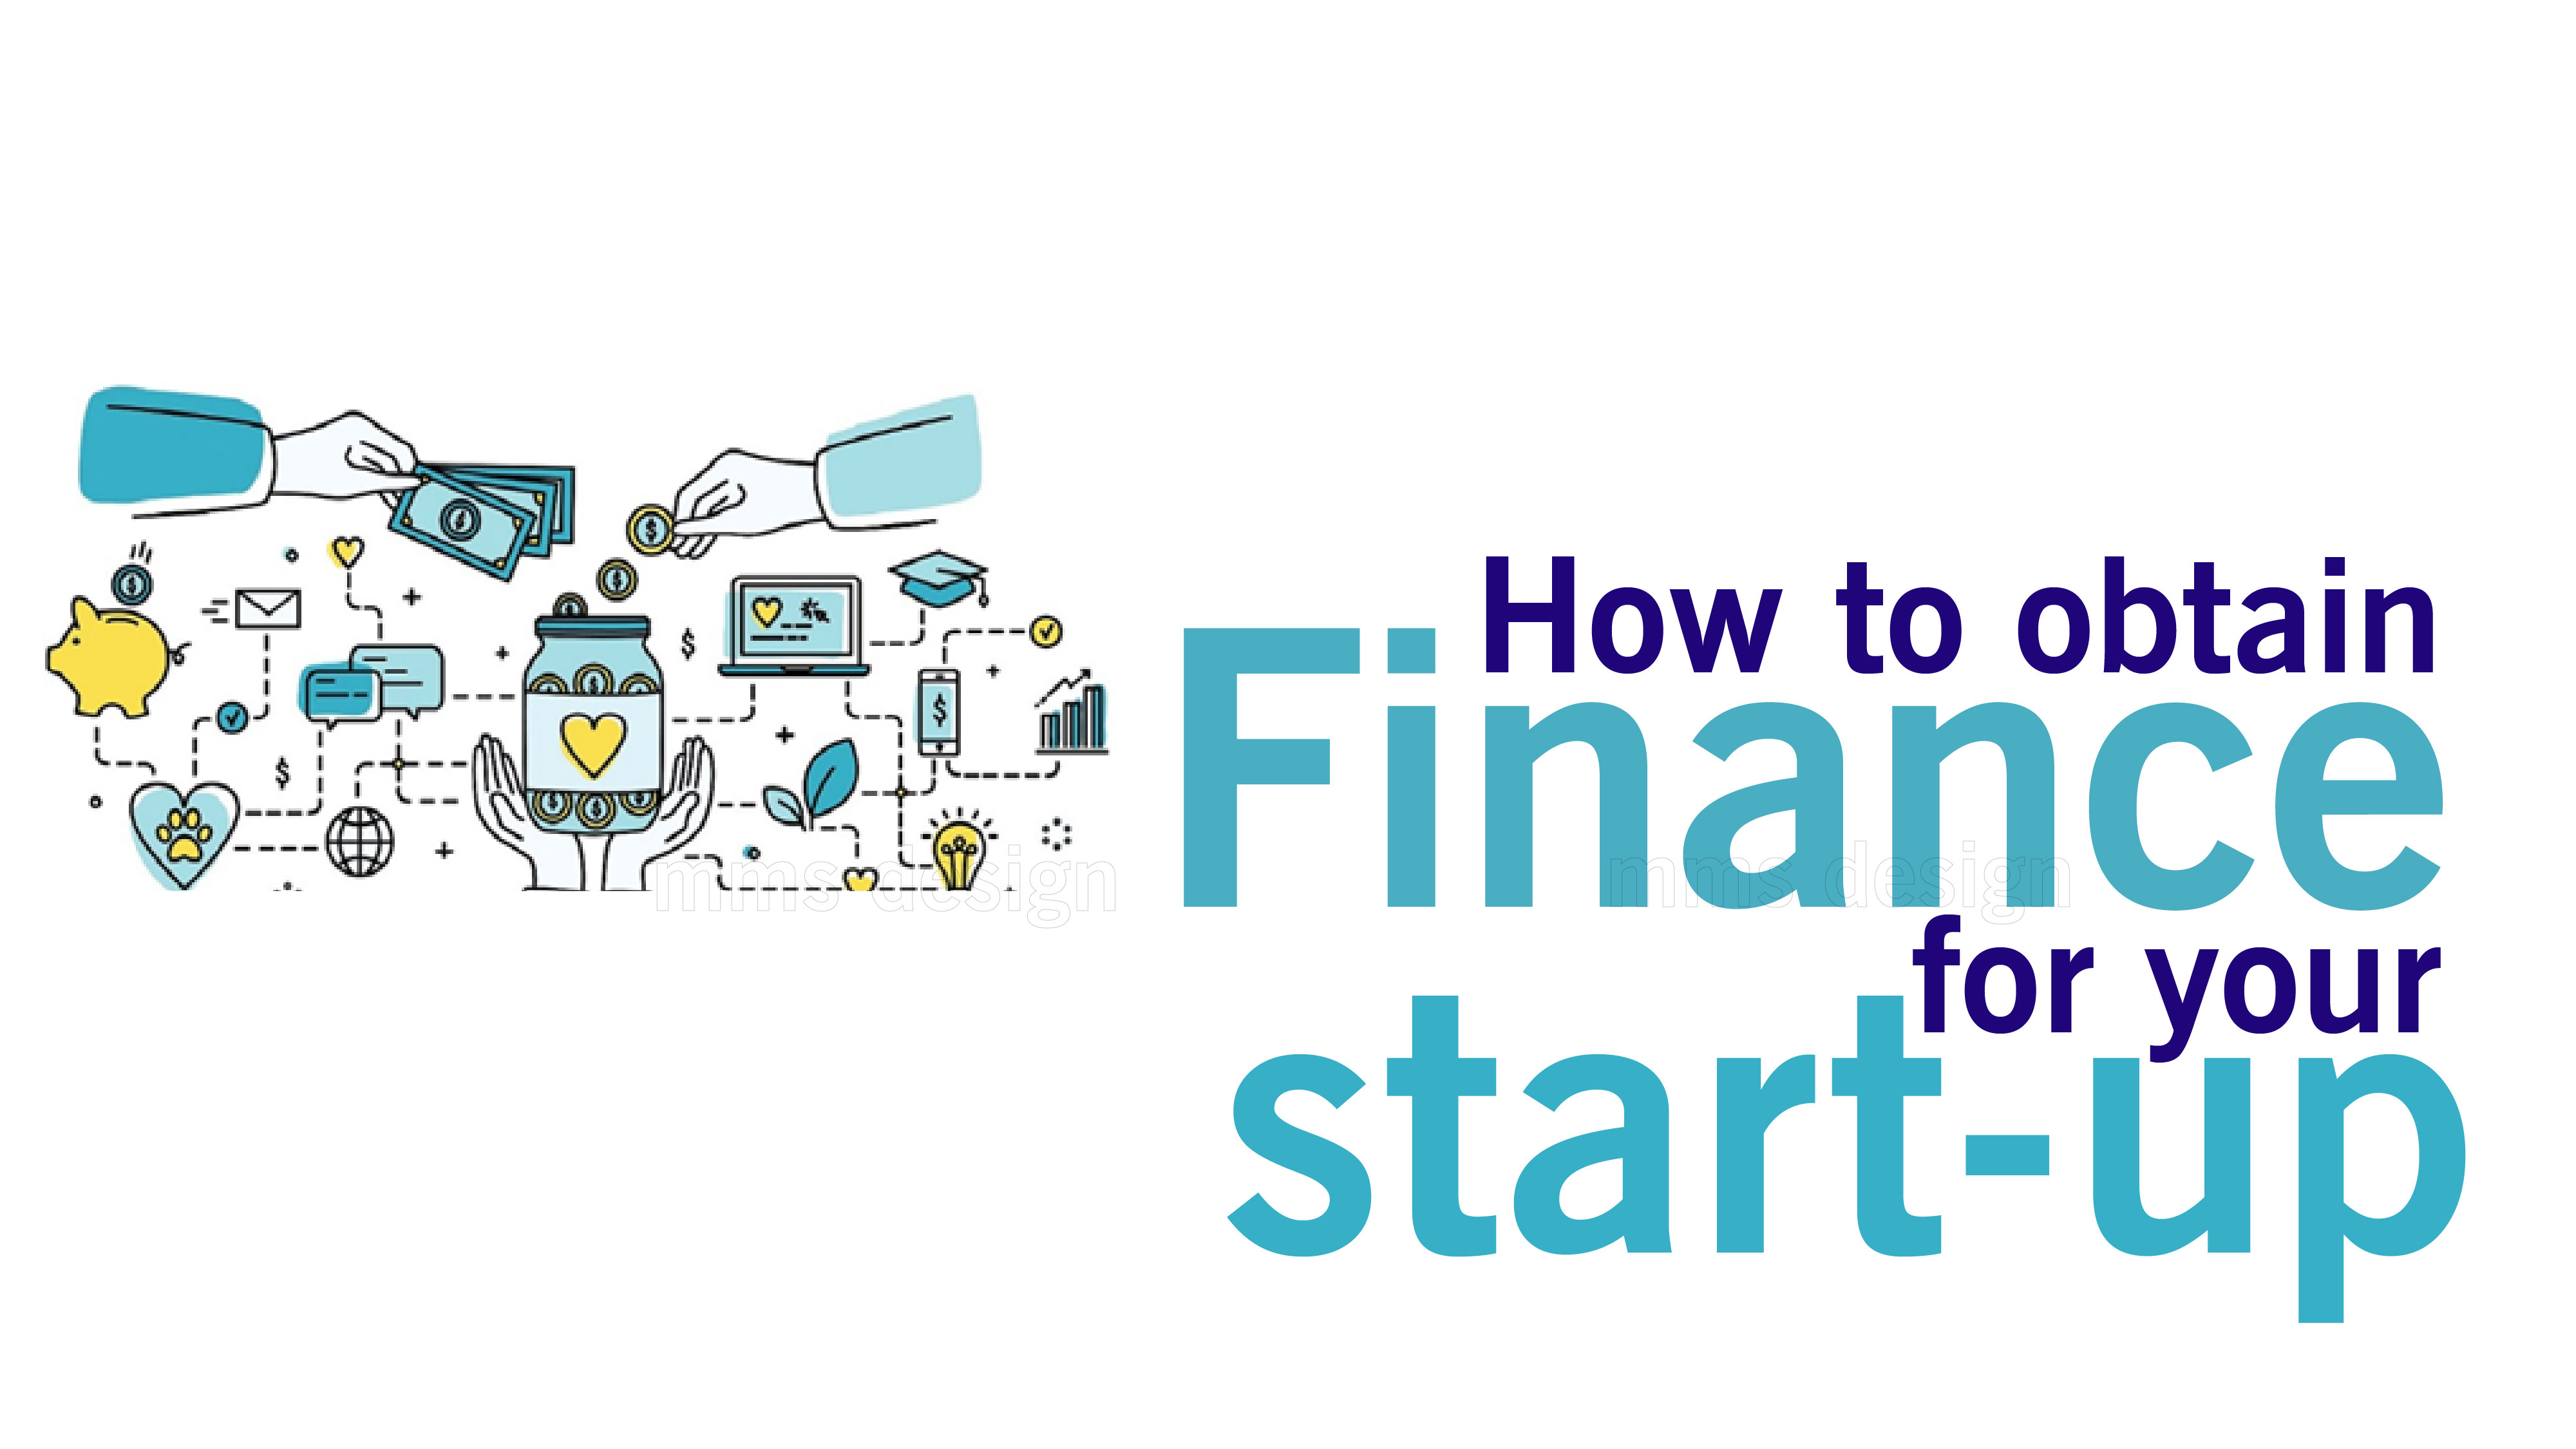 How to obtain finance for your start-up